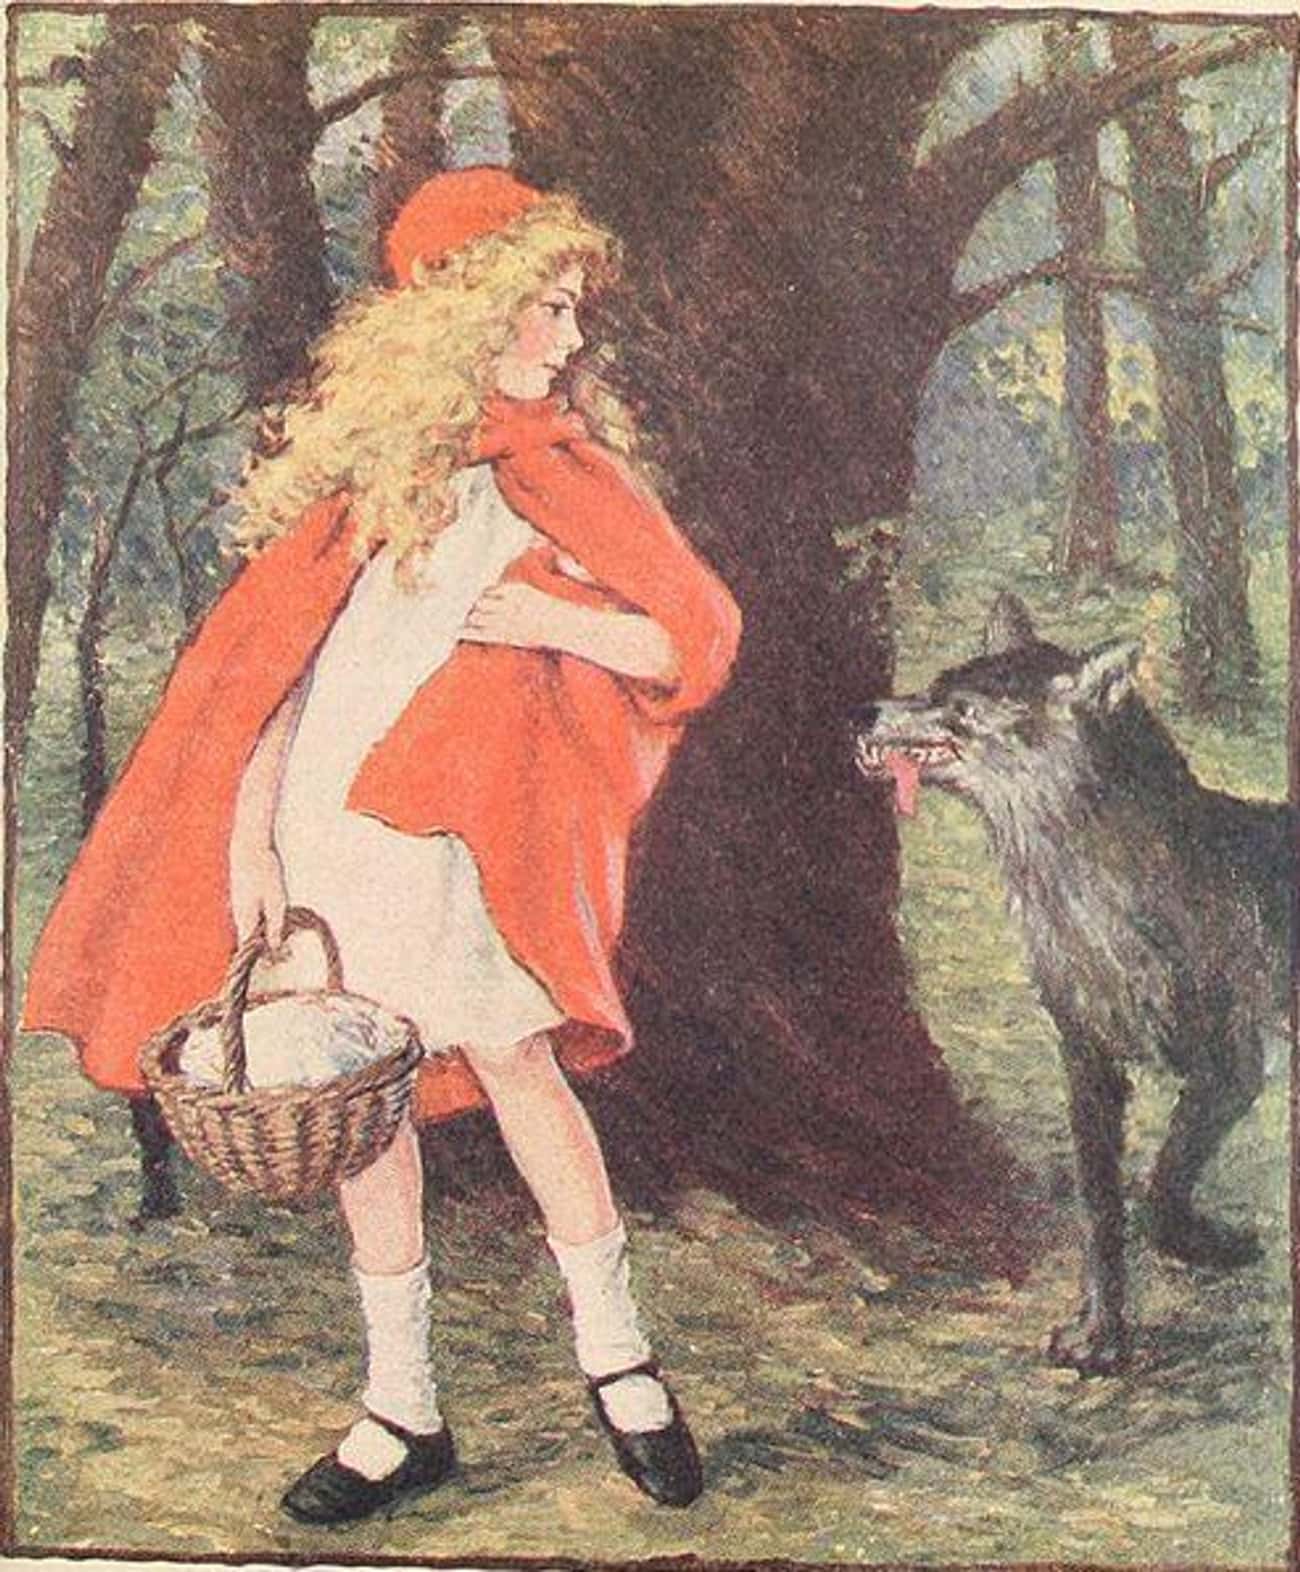 In The Original Little Red Riding Hood The Wolf Forced Her To Eat Her Grandma